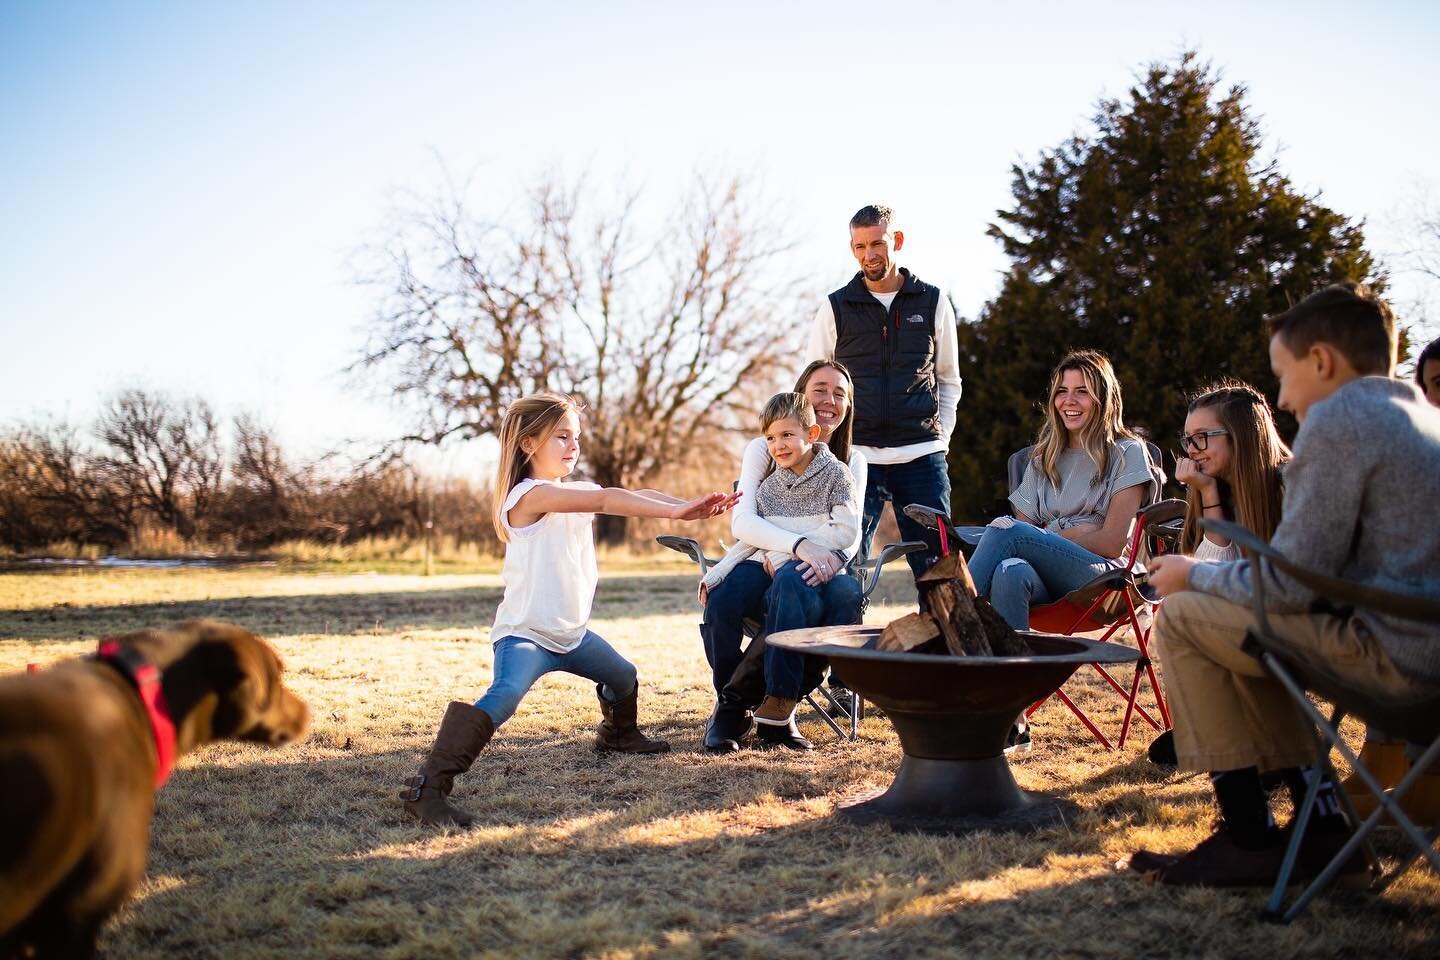 A different kind of family photo 😉 Not fussy. Not planned. Just a buncha happy people being happy people. My favorite kind of photo. 💛
#amarillofamilyphotographer #canyontexasphotographer sfamily